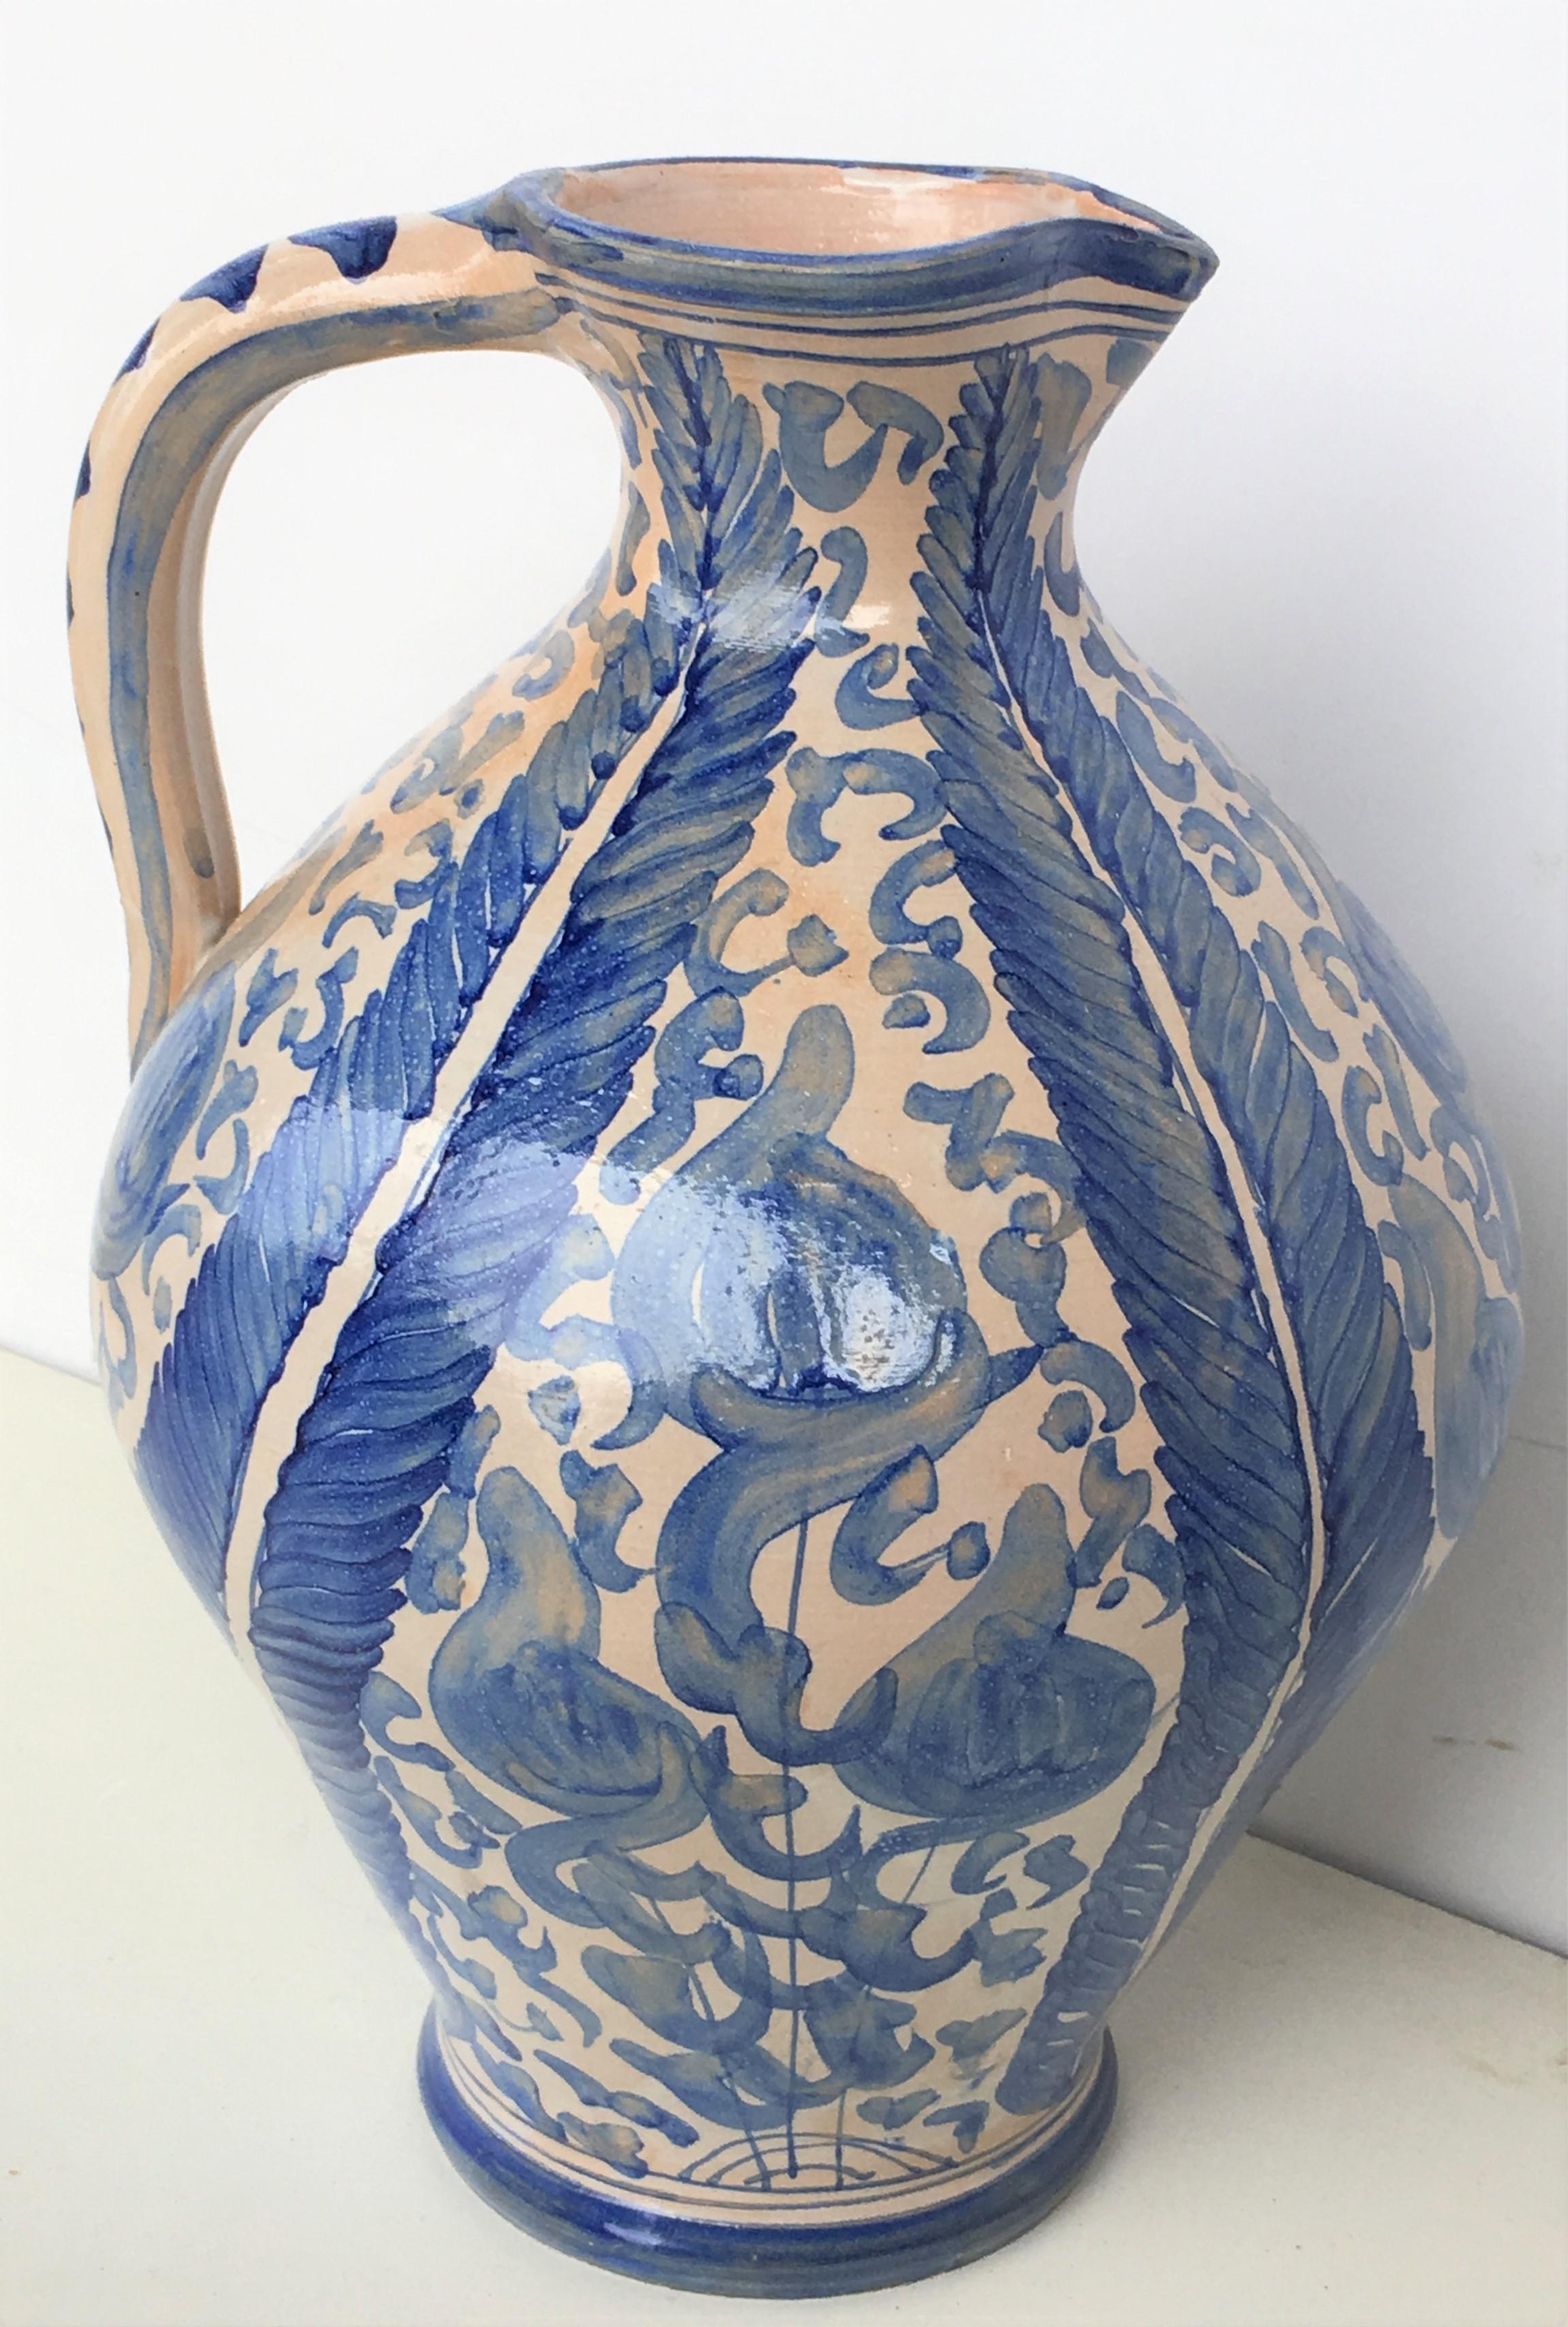 A striking Spanish glazed earthenware handled blue and white painted vessel, the body underglaze blue ornamental decorated .
Vessel of porous clay, with a bulging belly, a circular handle on the upper part, a mouth to fill it and an outlet to